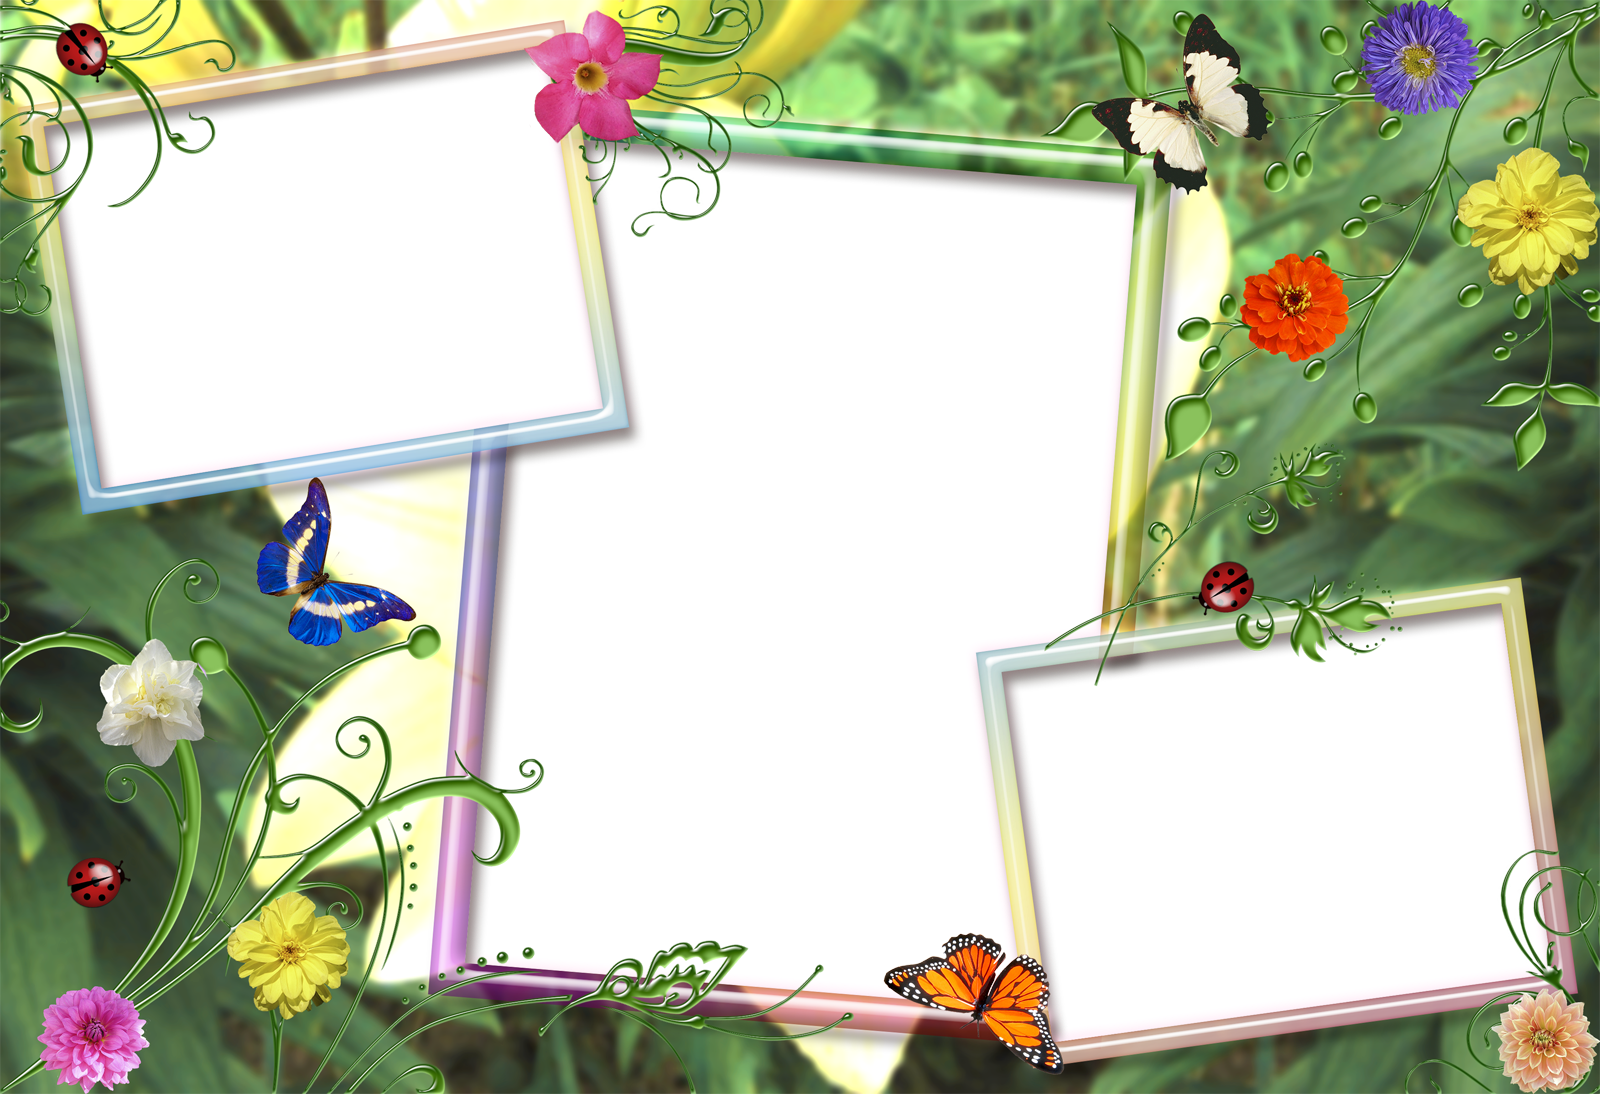 Nature Photo Frame Wallpapers High Quality | Download Free